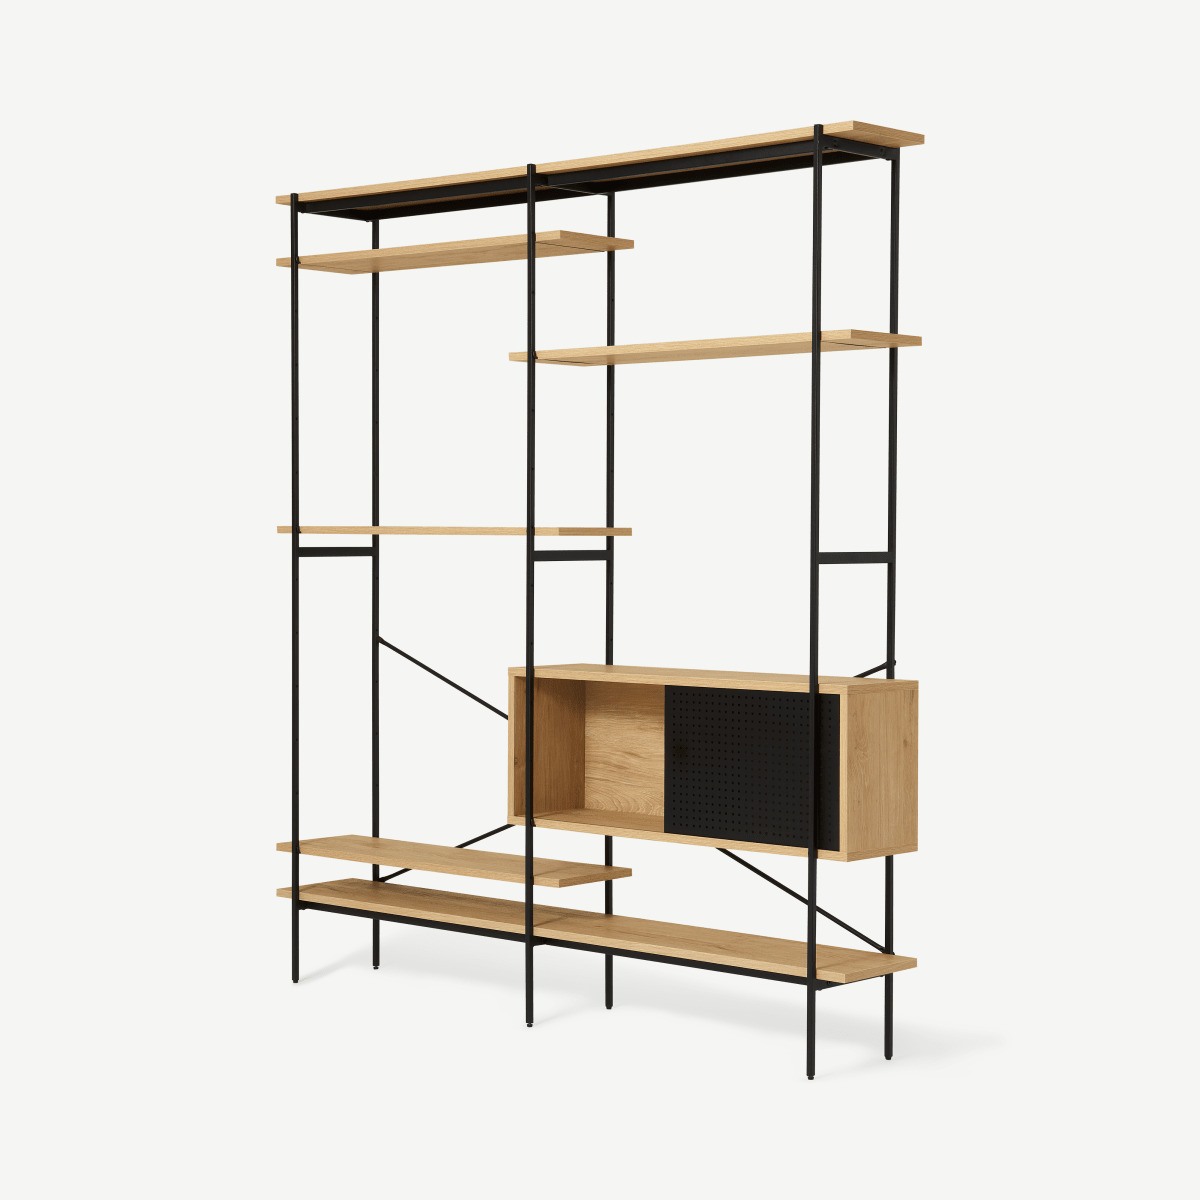 Angus Wide Shelving Wall Unit, Oak Effect & Perforated Metal